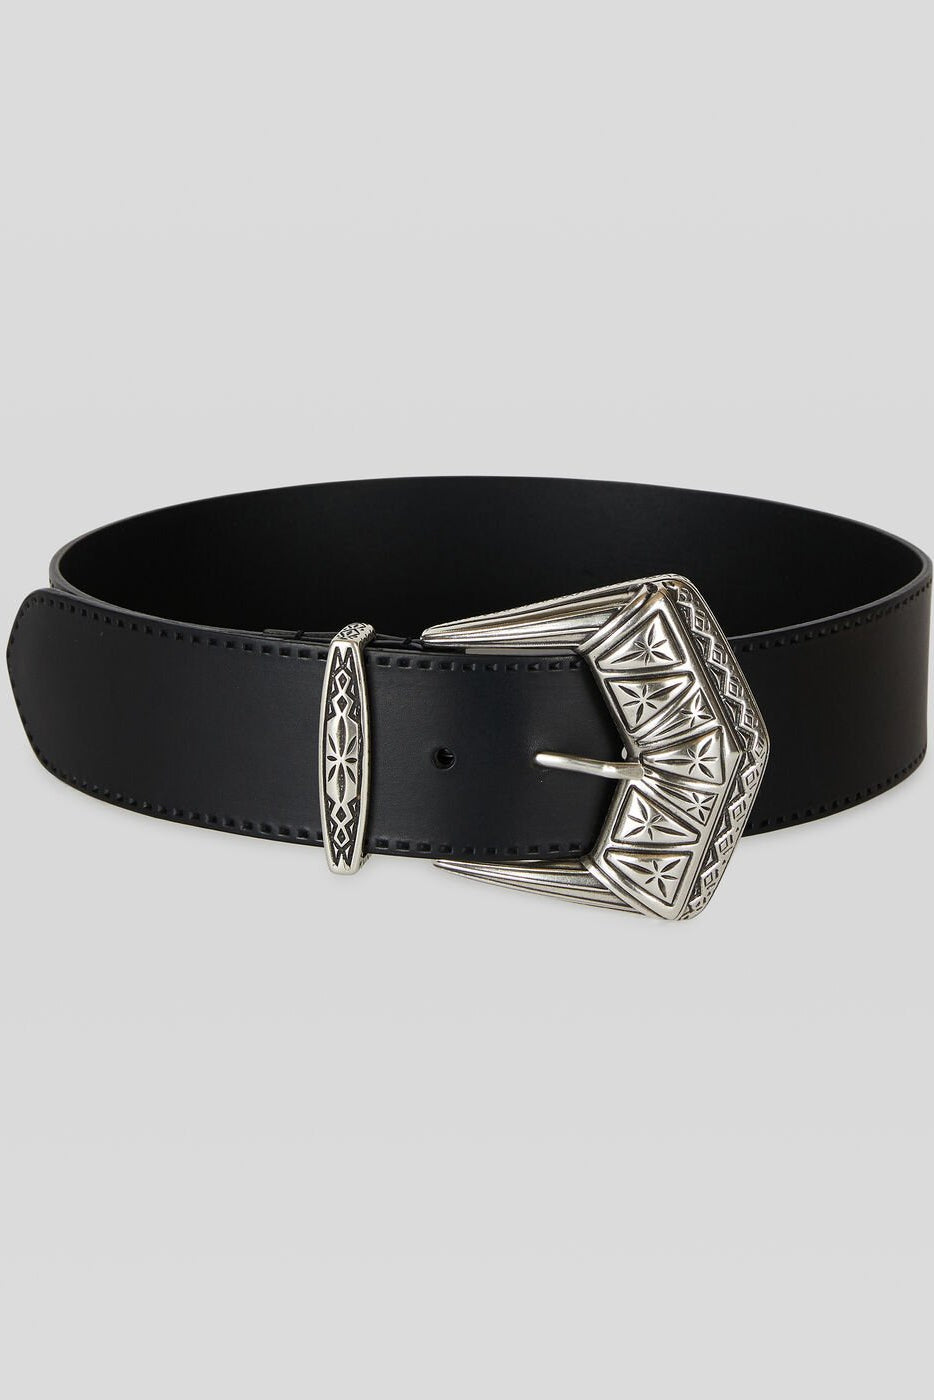 Black Belt With Angled Buckle